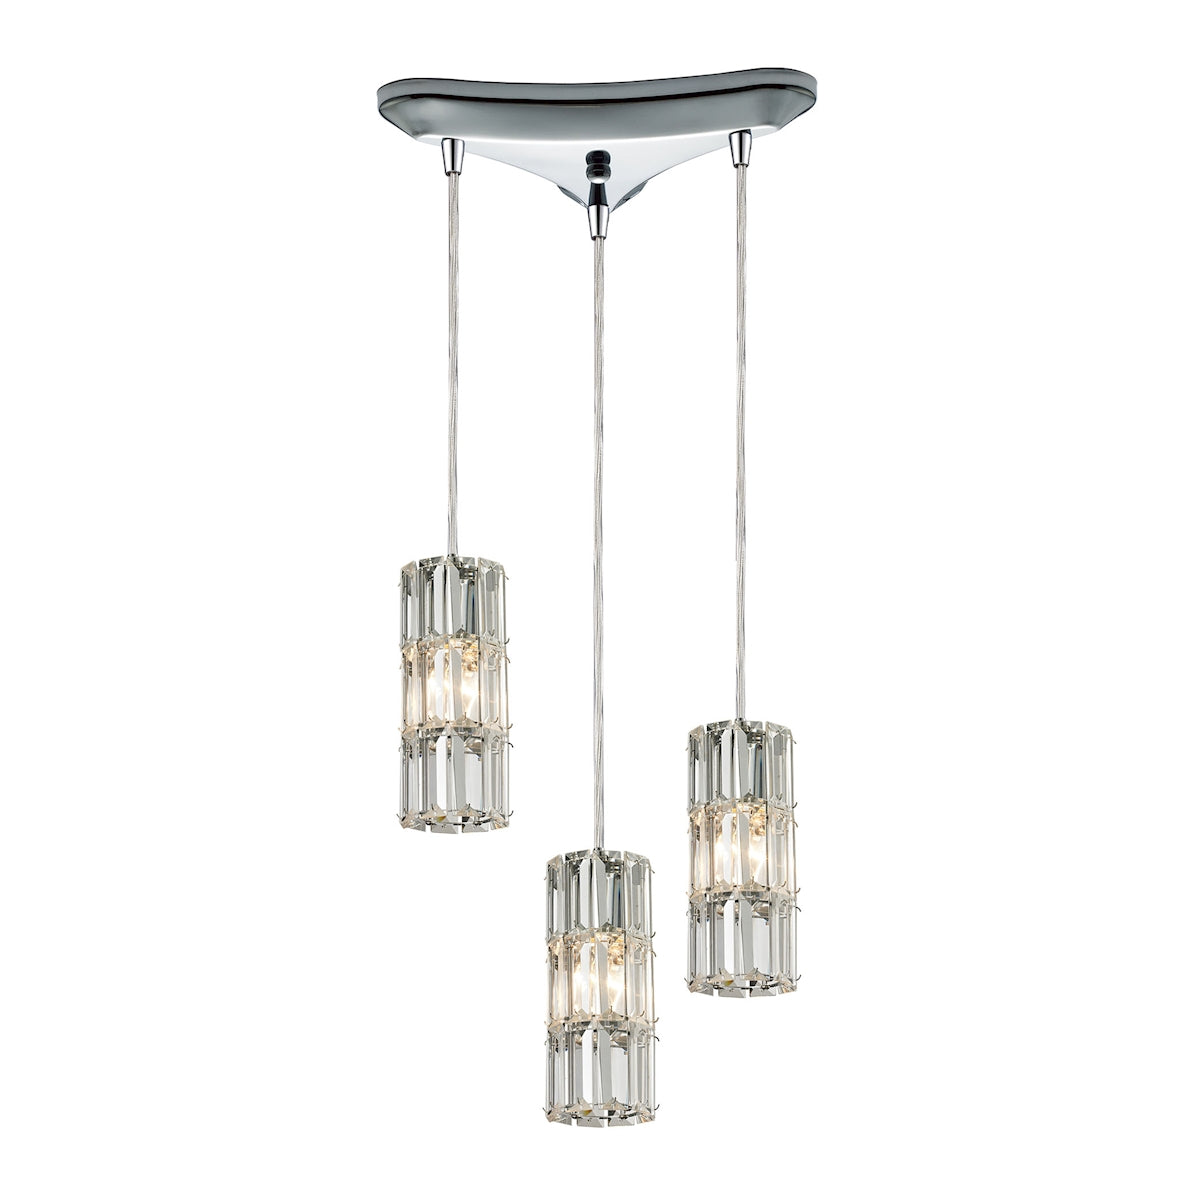 ELK Lighting 31486/3 Cynthia 3-Light Triangular Pendant Fixture in Polished Chrome with Crystal